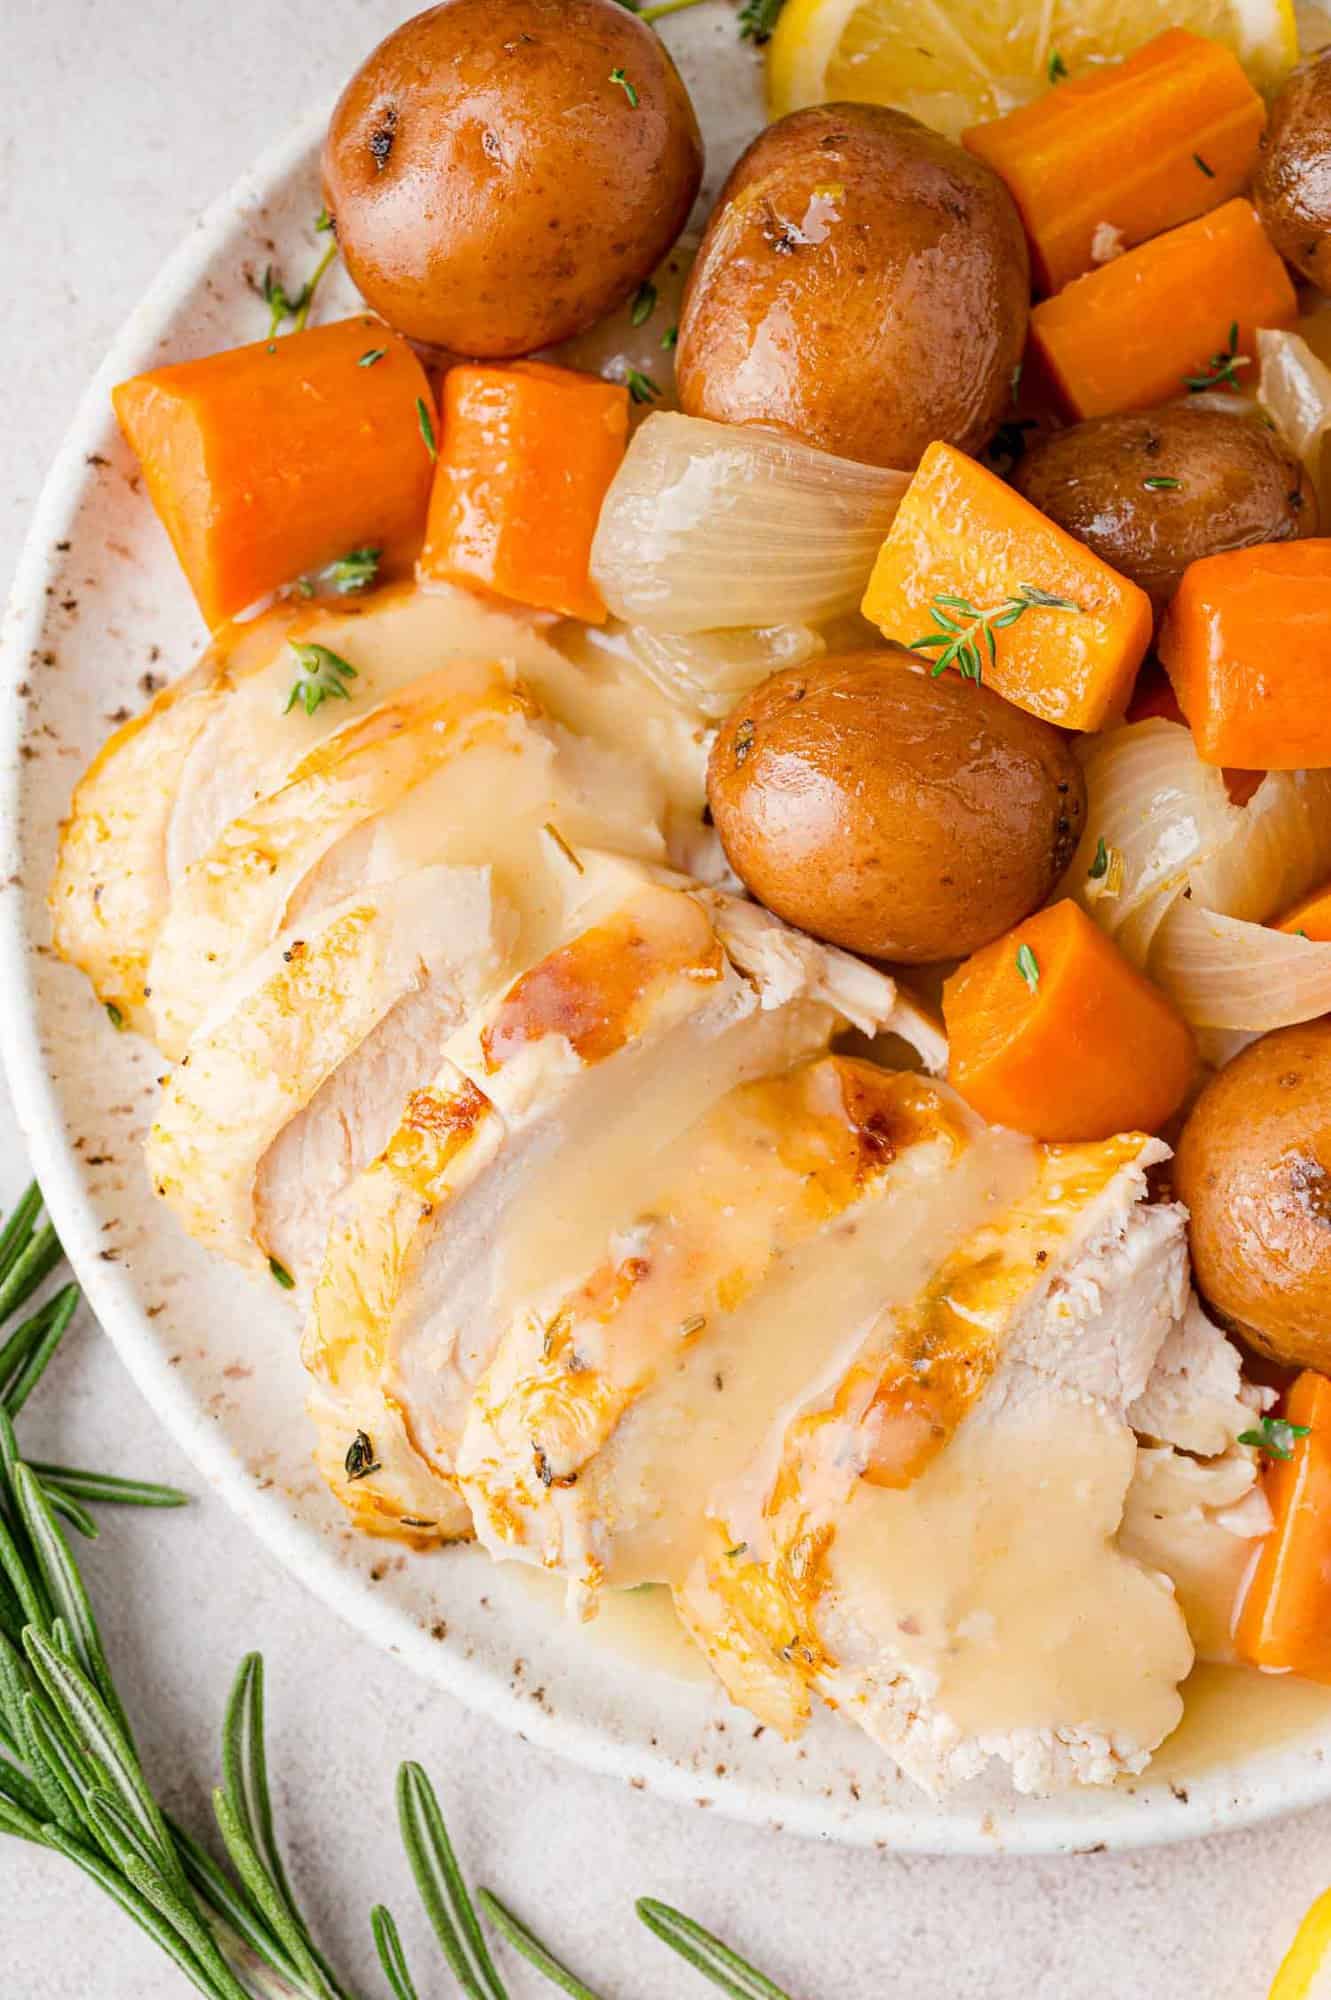 Sliced chicken and gravy on a platter with potatoes and carrots.